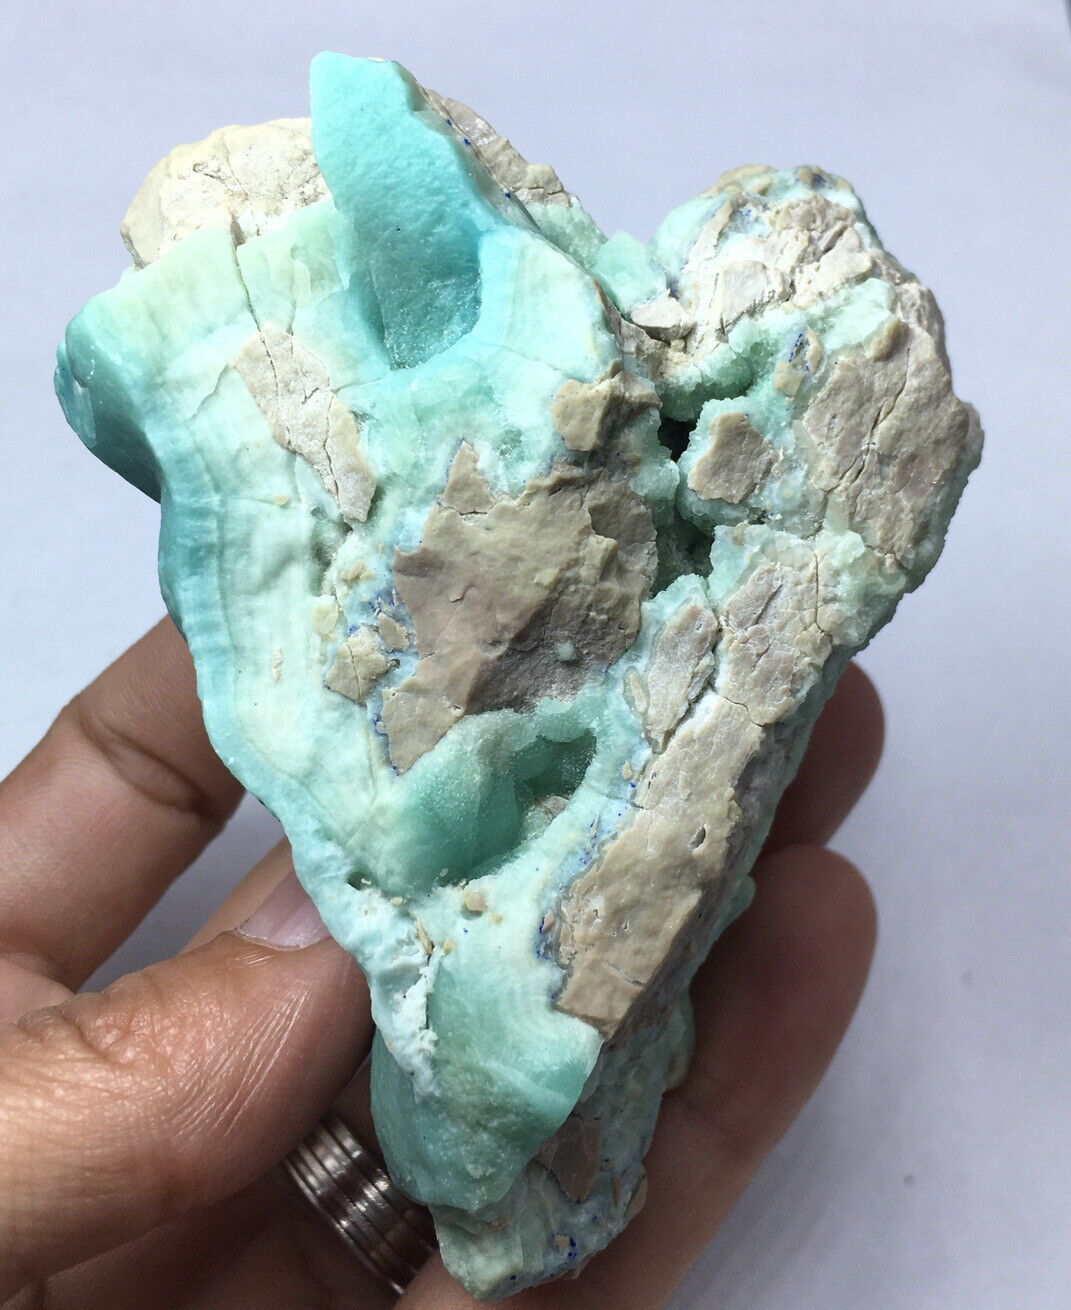 Bluish Green Aragonite crystal with Botryoidal Formation & heart shape